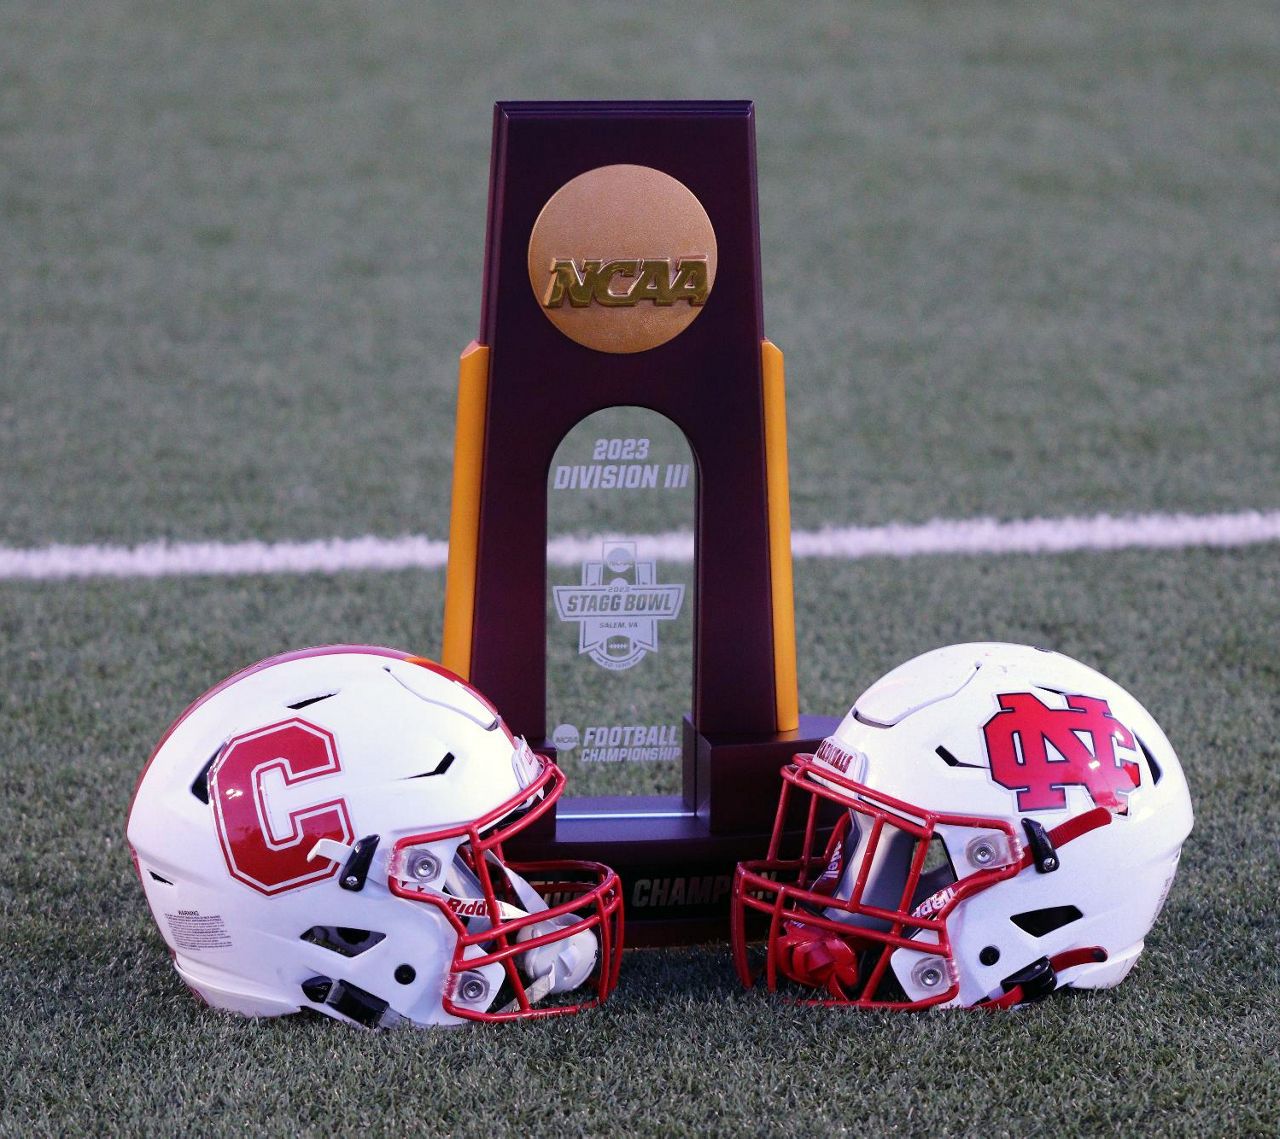 Cortland looks to make history in Amos Alonzo Stagg Bowl